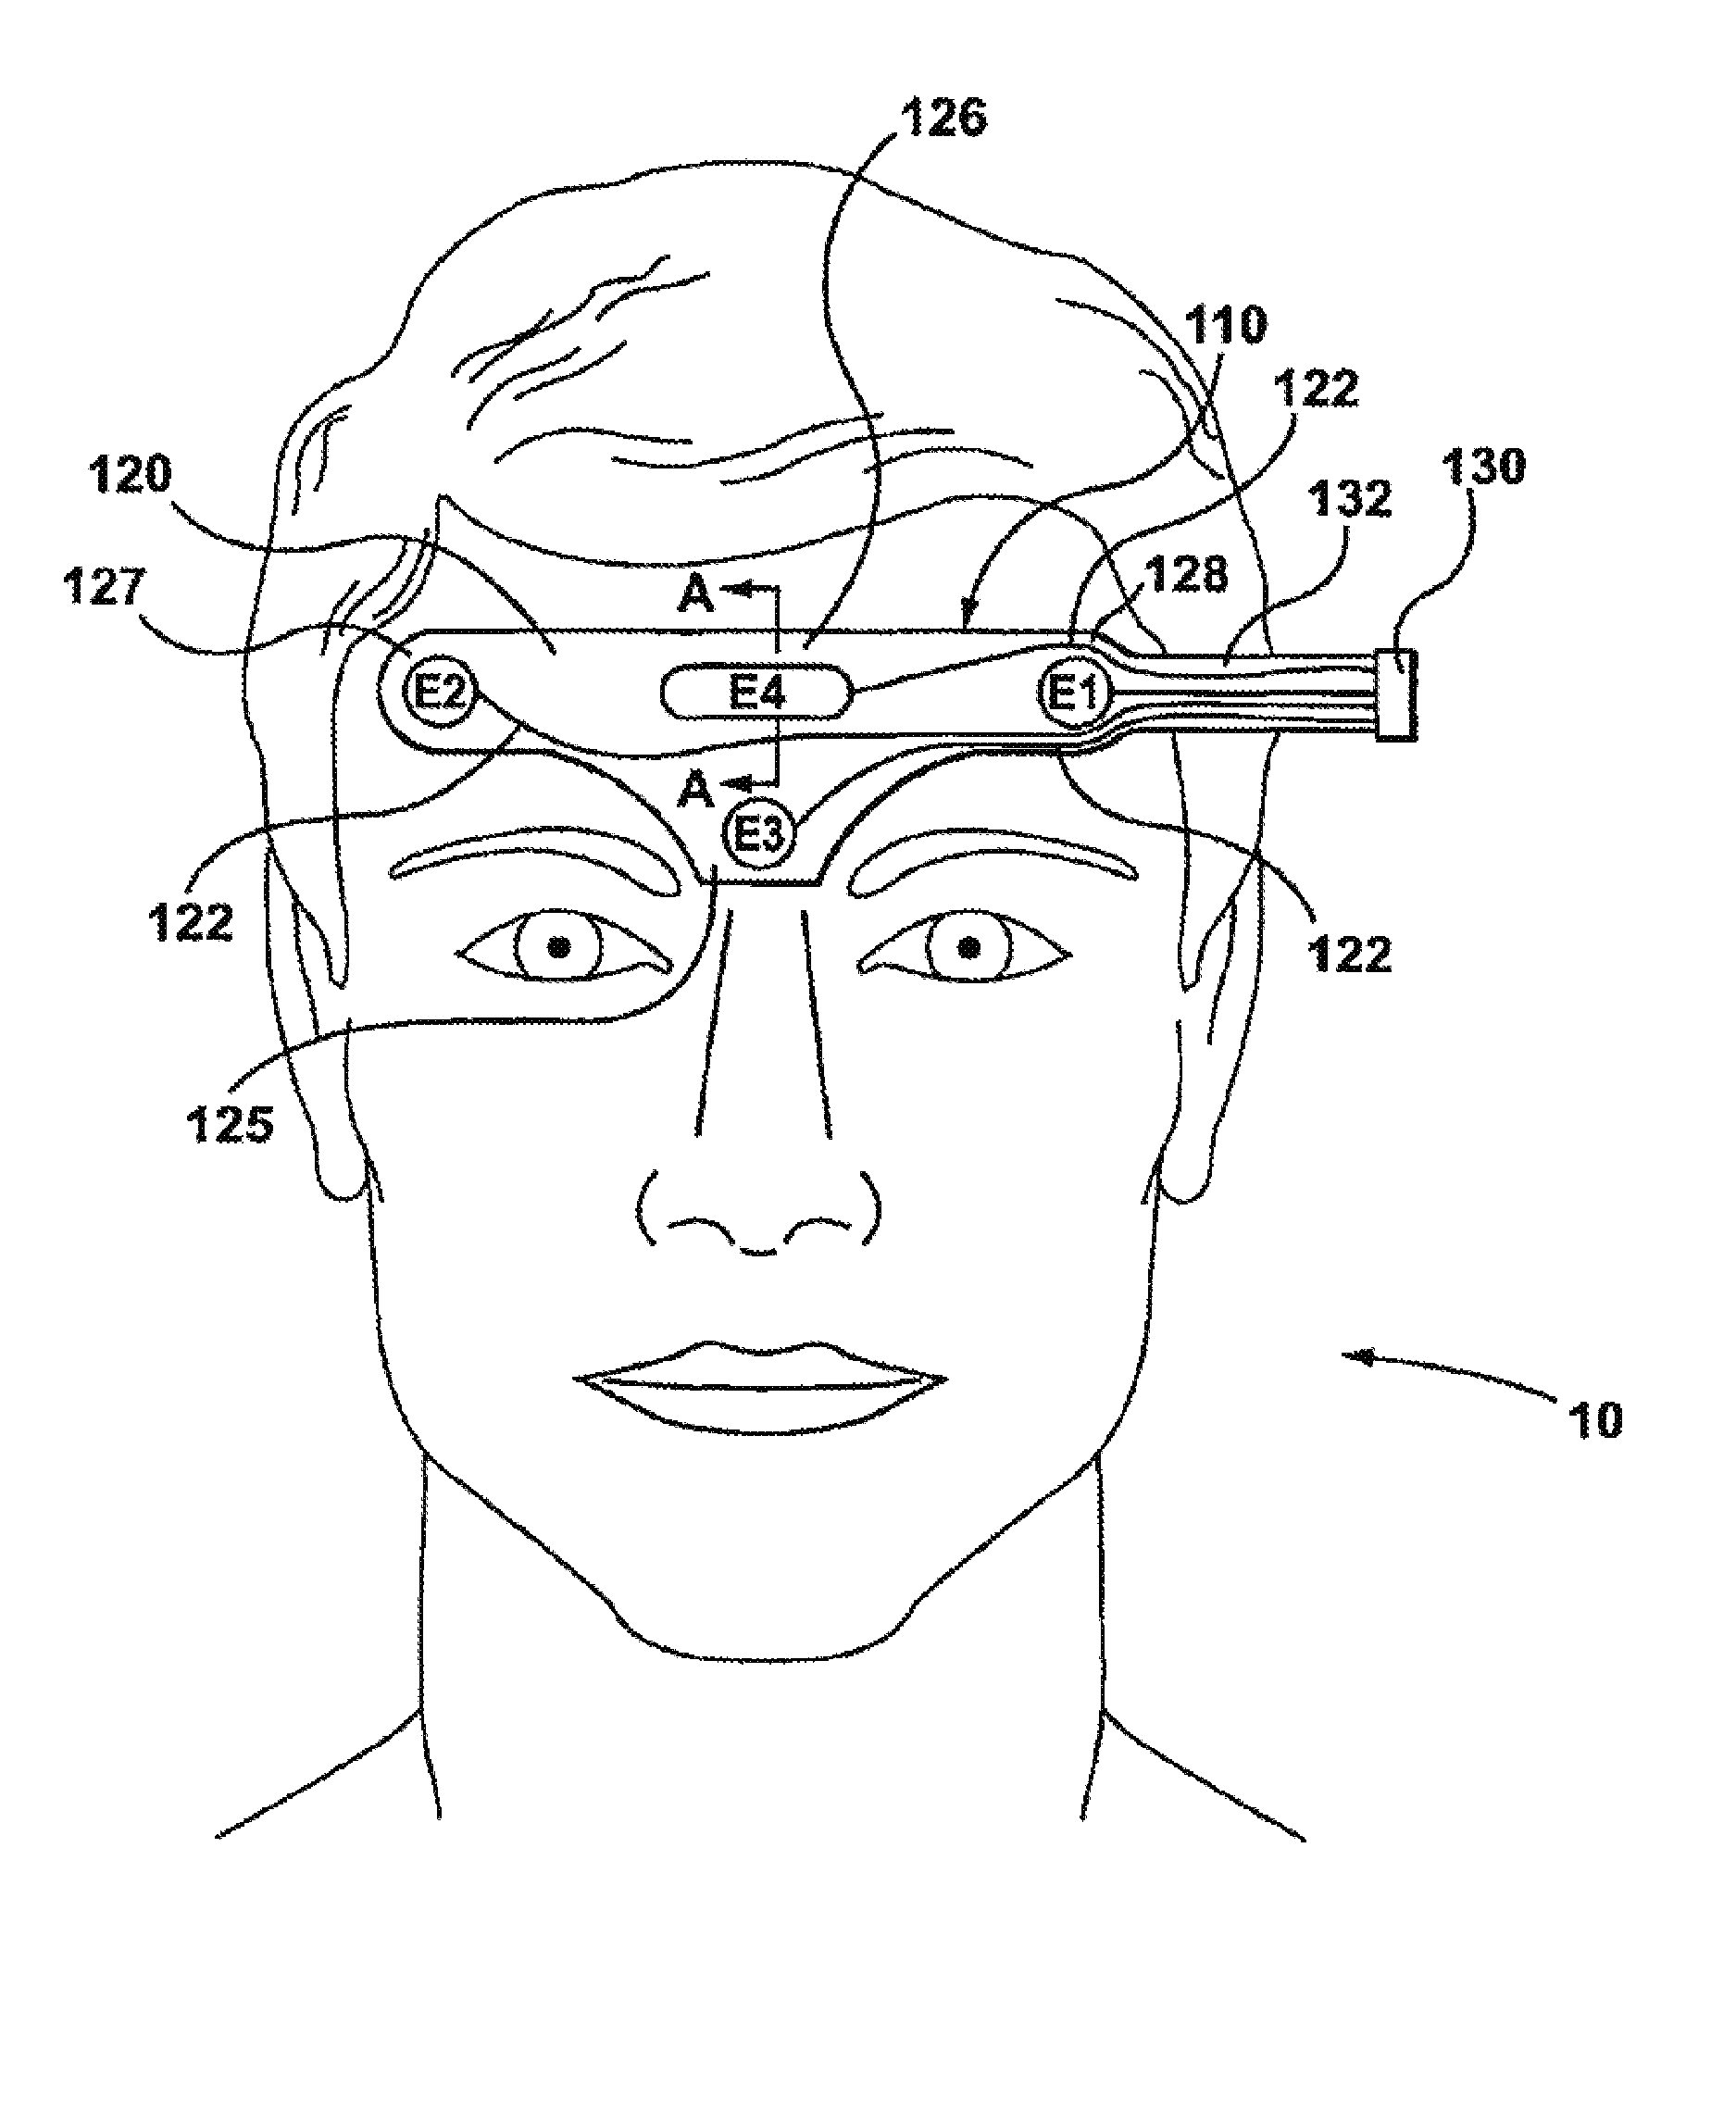 System for Sleep Stage Determination Using Frontal Electrodes